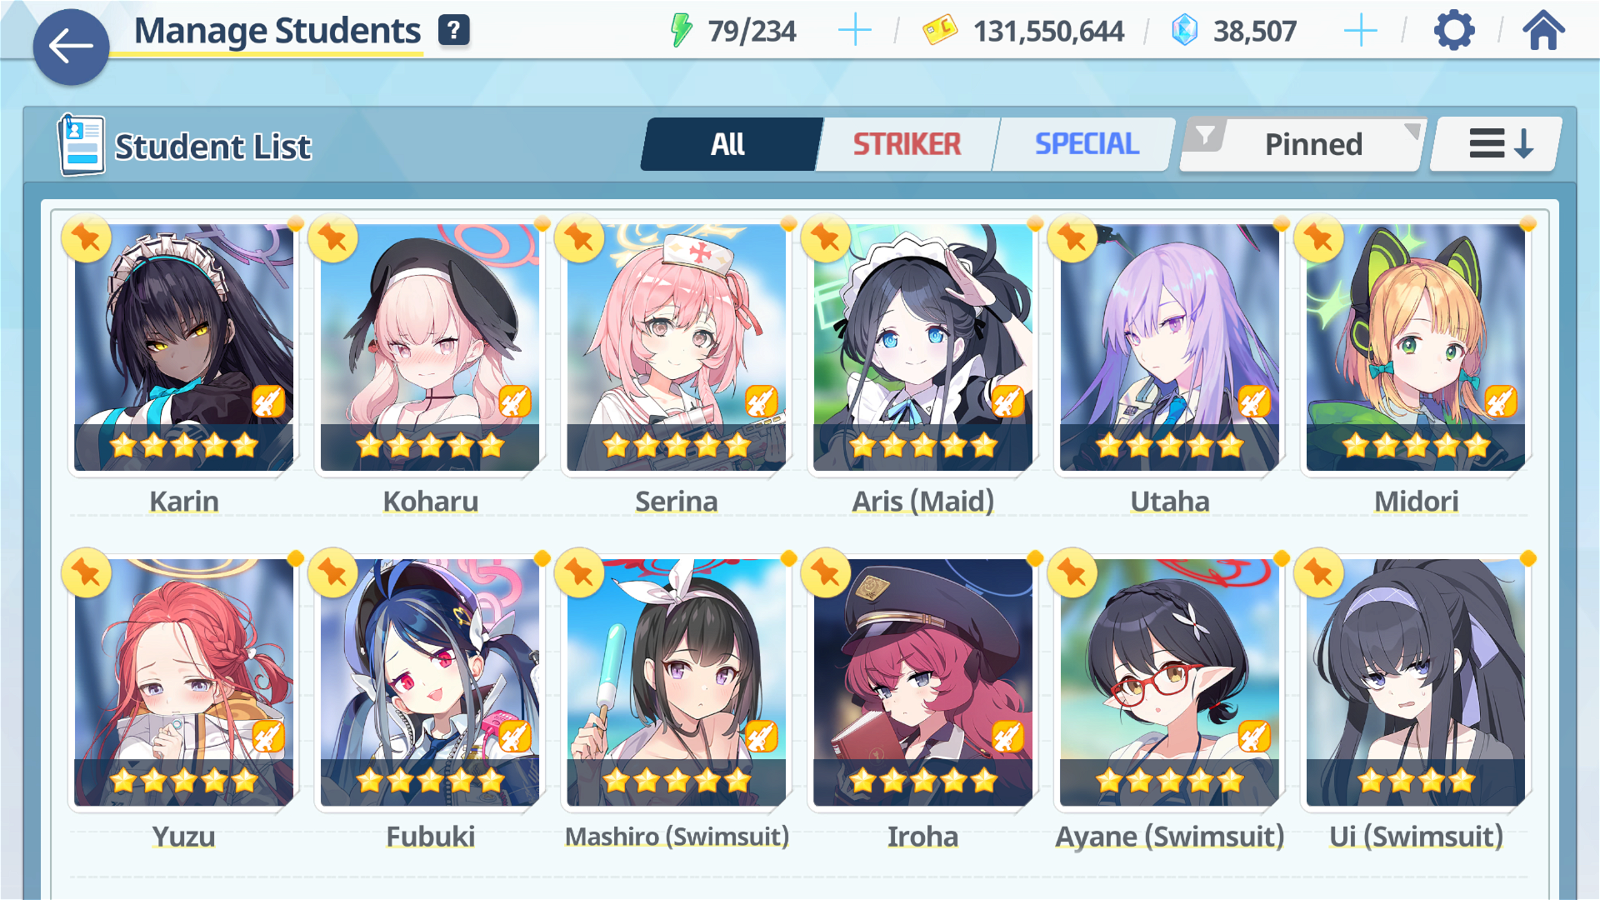 Selling - [ASIA] High End + 128 Students + 25 UE50 + 19 Limiteds + 38 ...